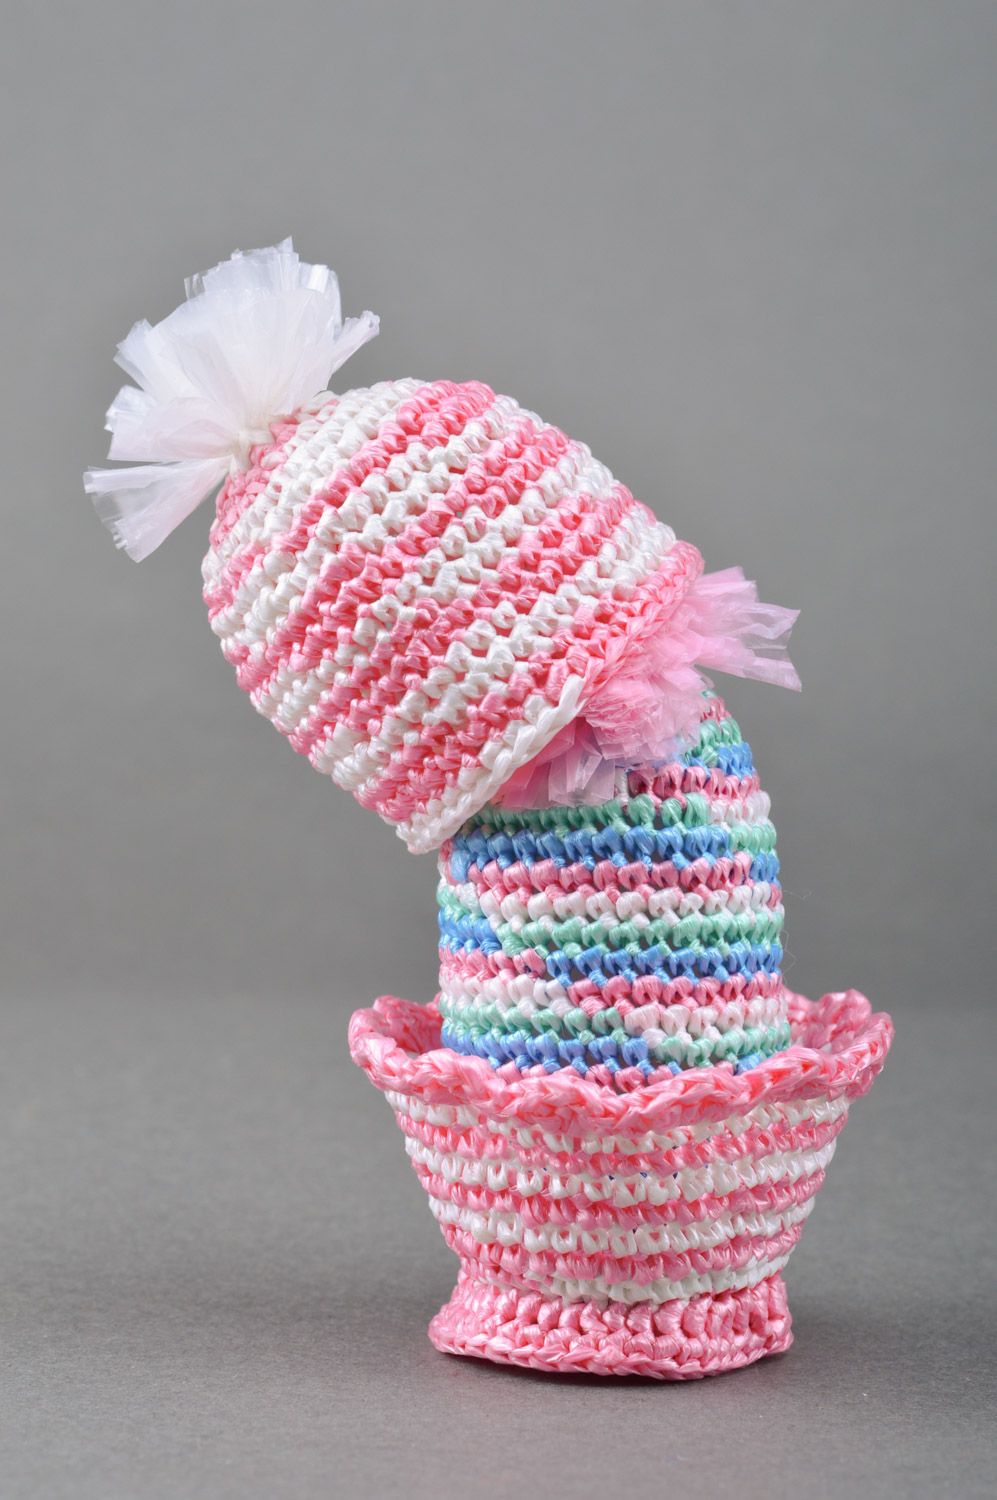 Handmade decorative Easter egg crocheted of pink threads on stand and cover photo 5